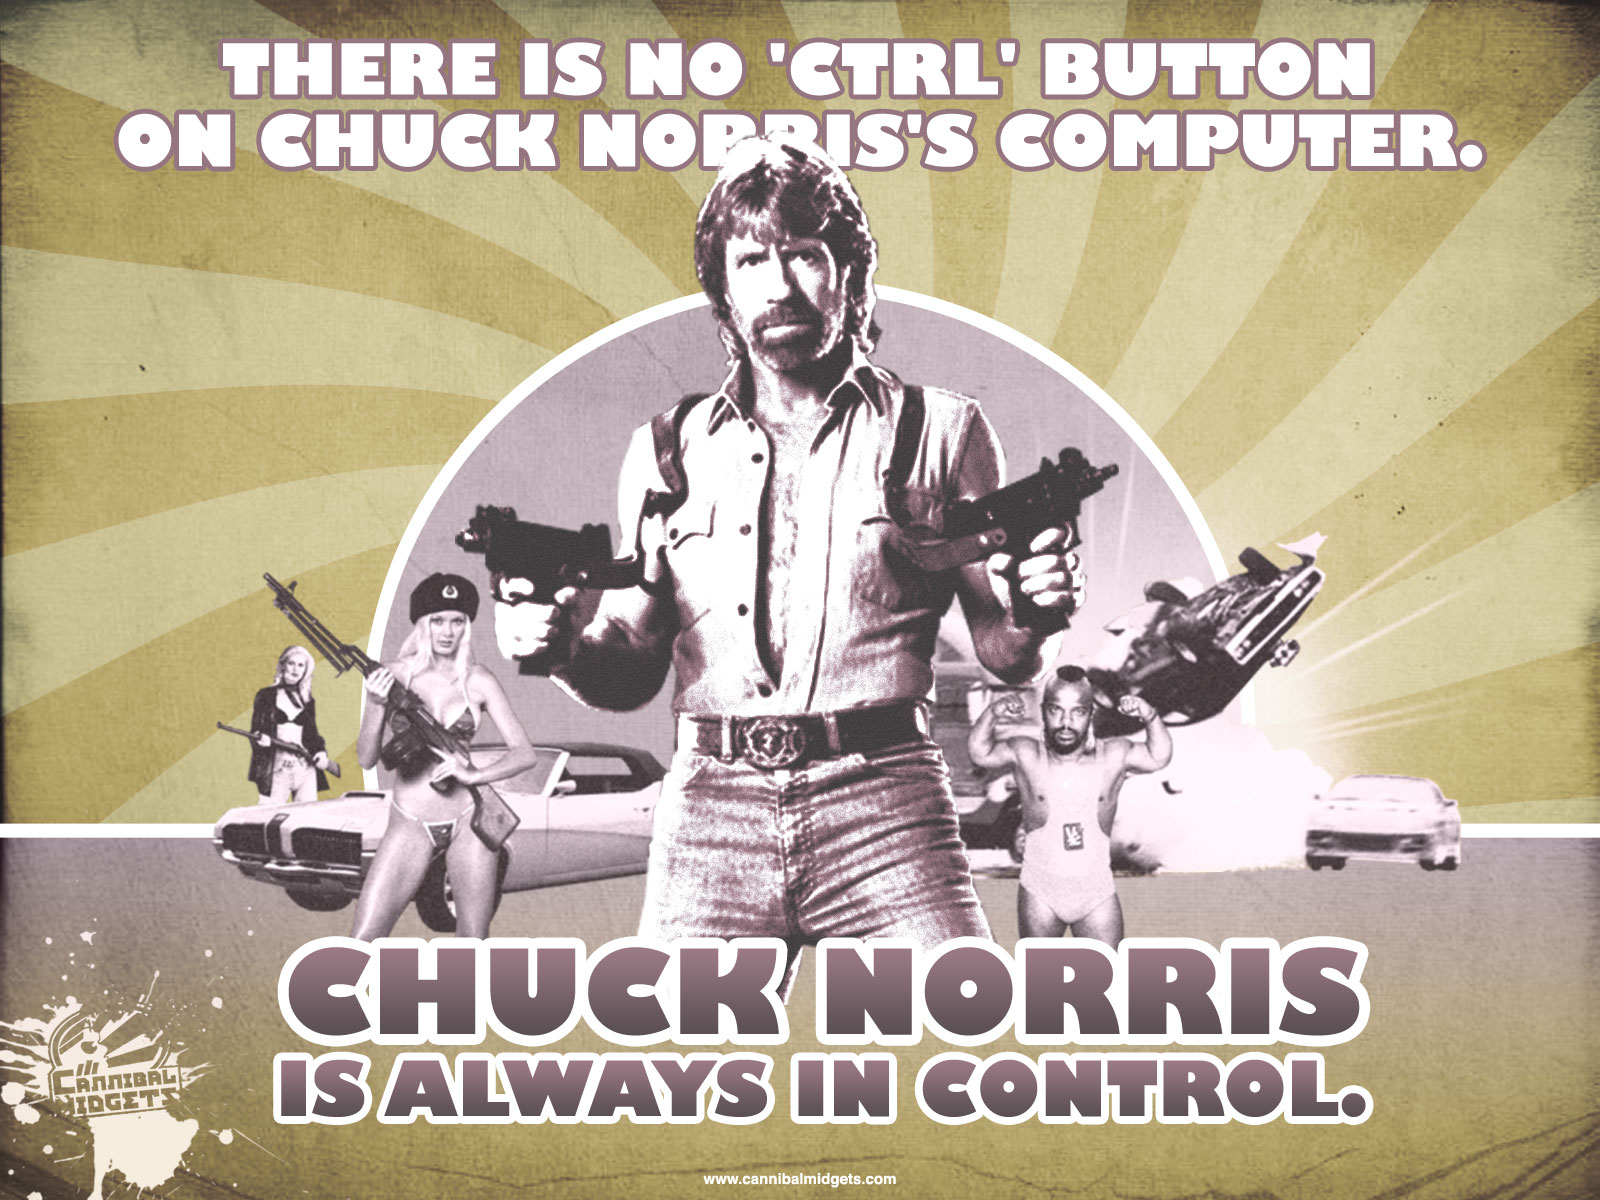 When Chuck Norris plays games!!!